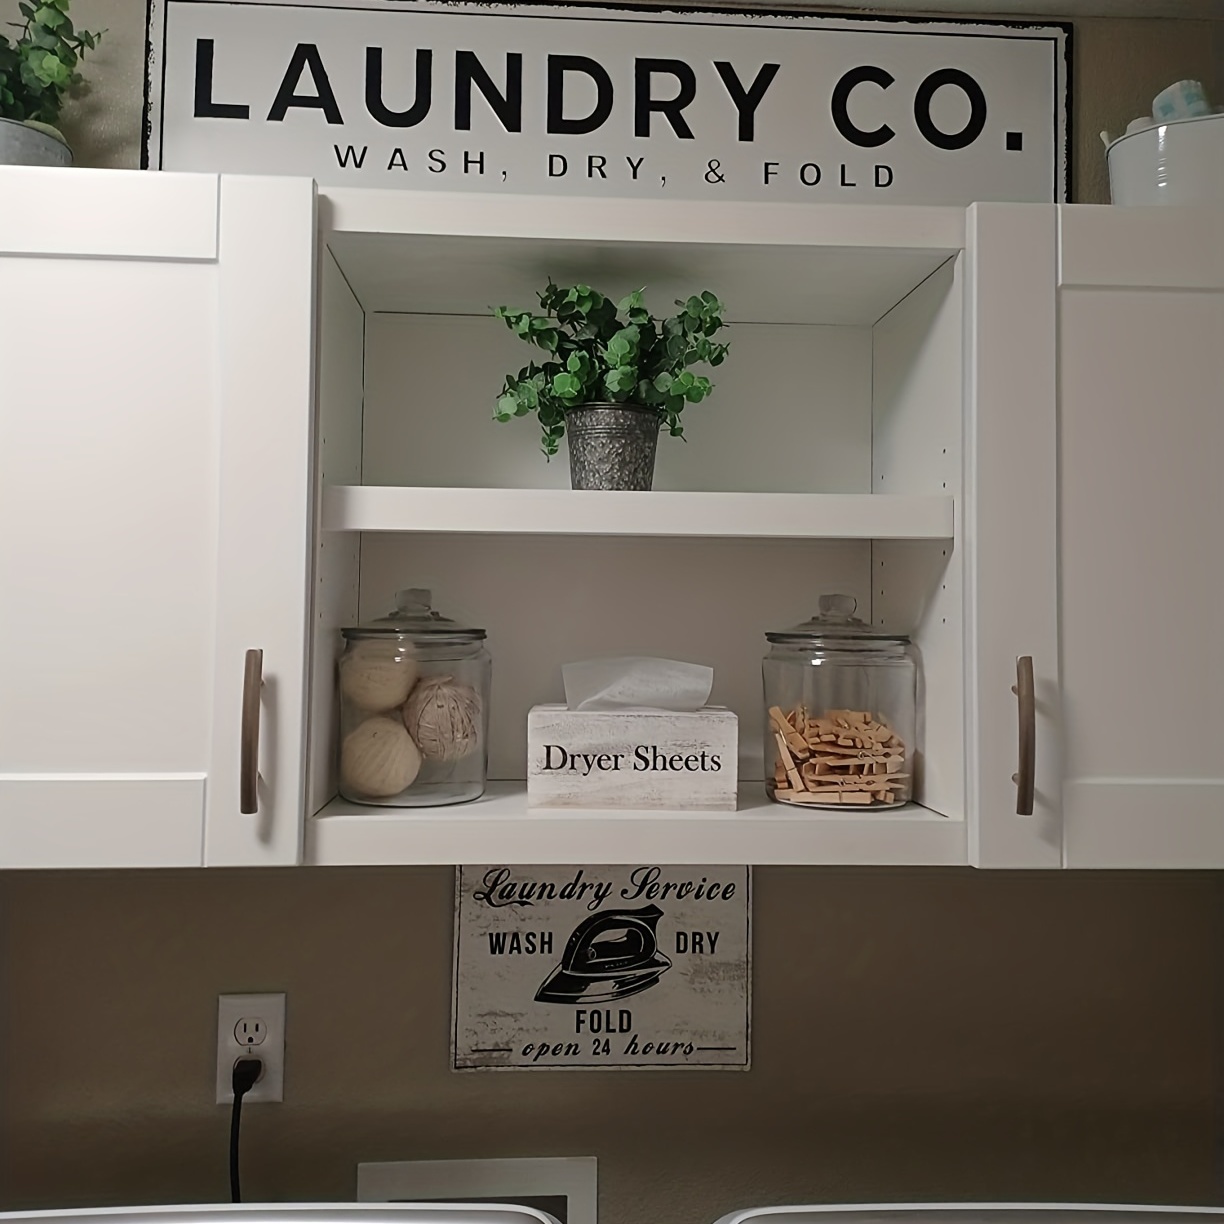 Laundry Detergent Container - Dryer Sheet Holder- Laundry Room